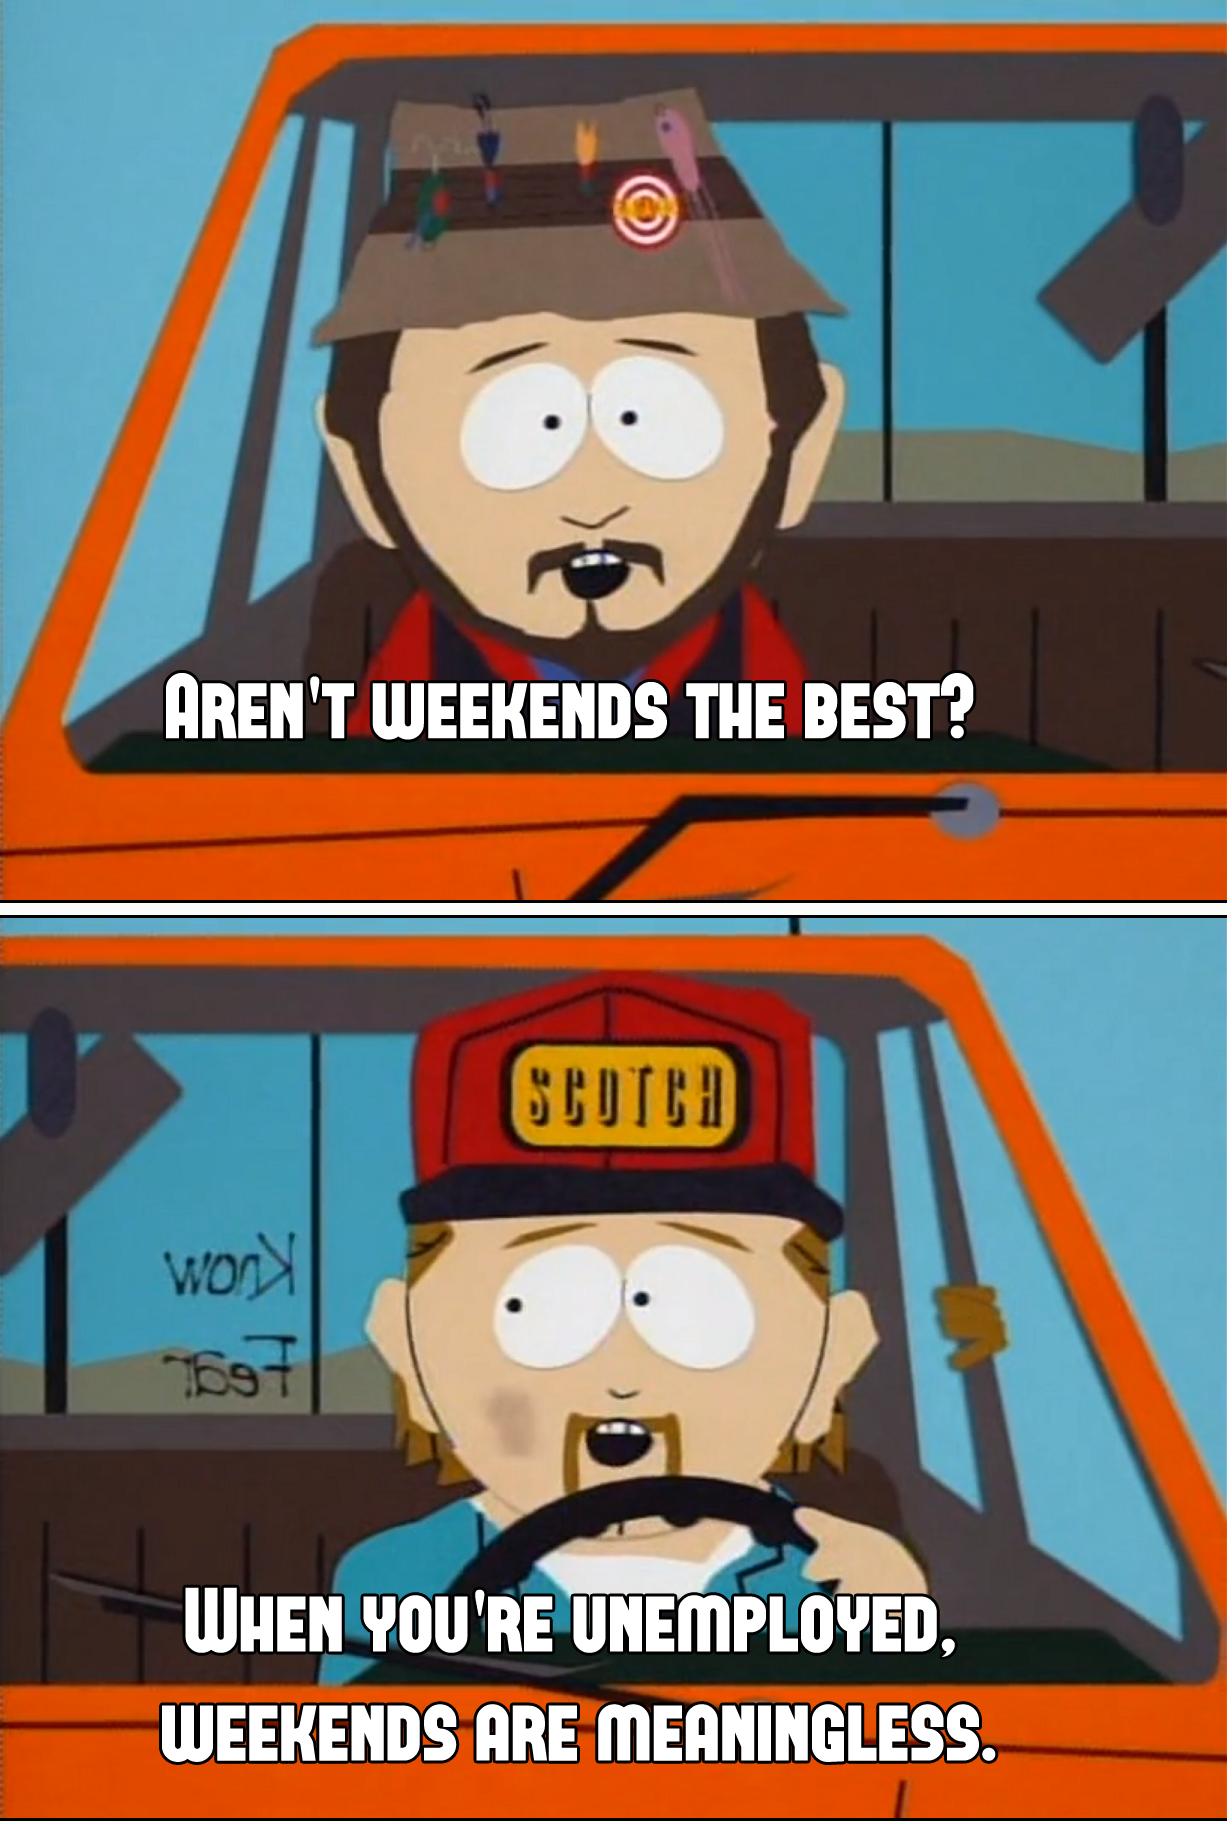 labor day meme - weekends are meaningless when you re unemployed - Aren'T Weekends The Best? Glutee won When You'Re Unemployed, Weekends Are Meaningless.